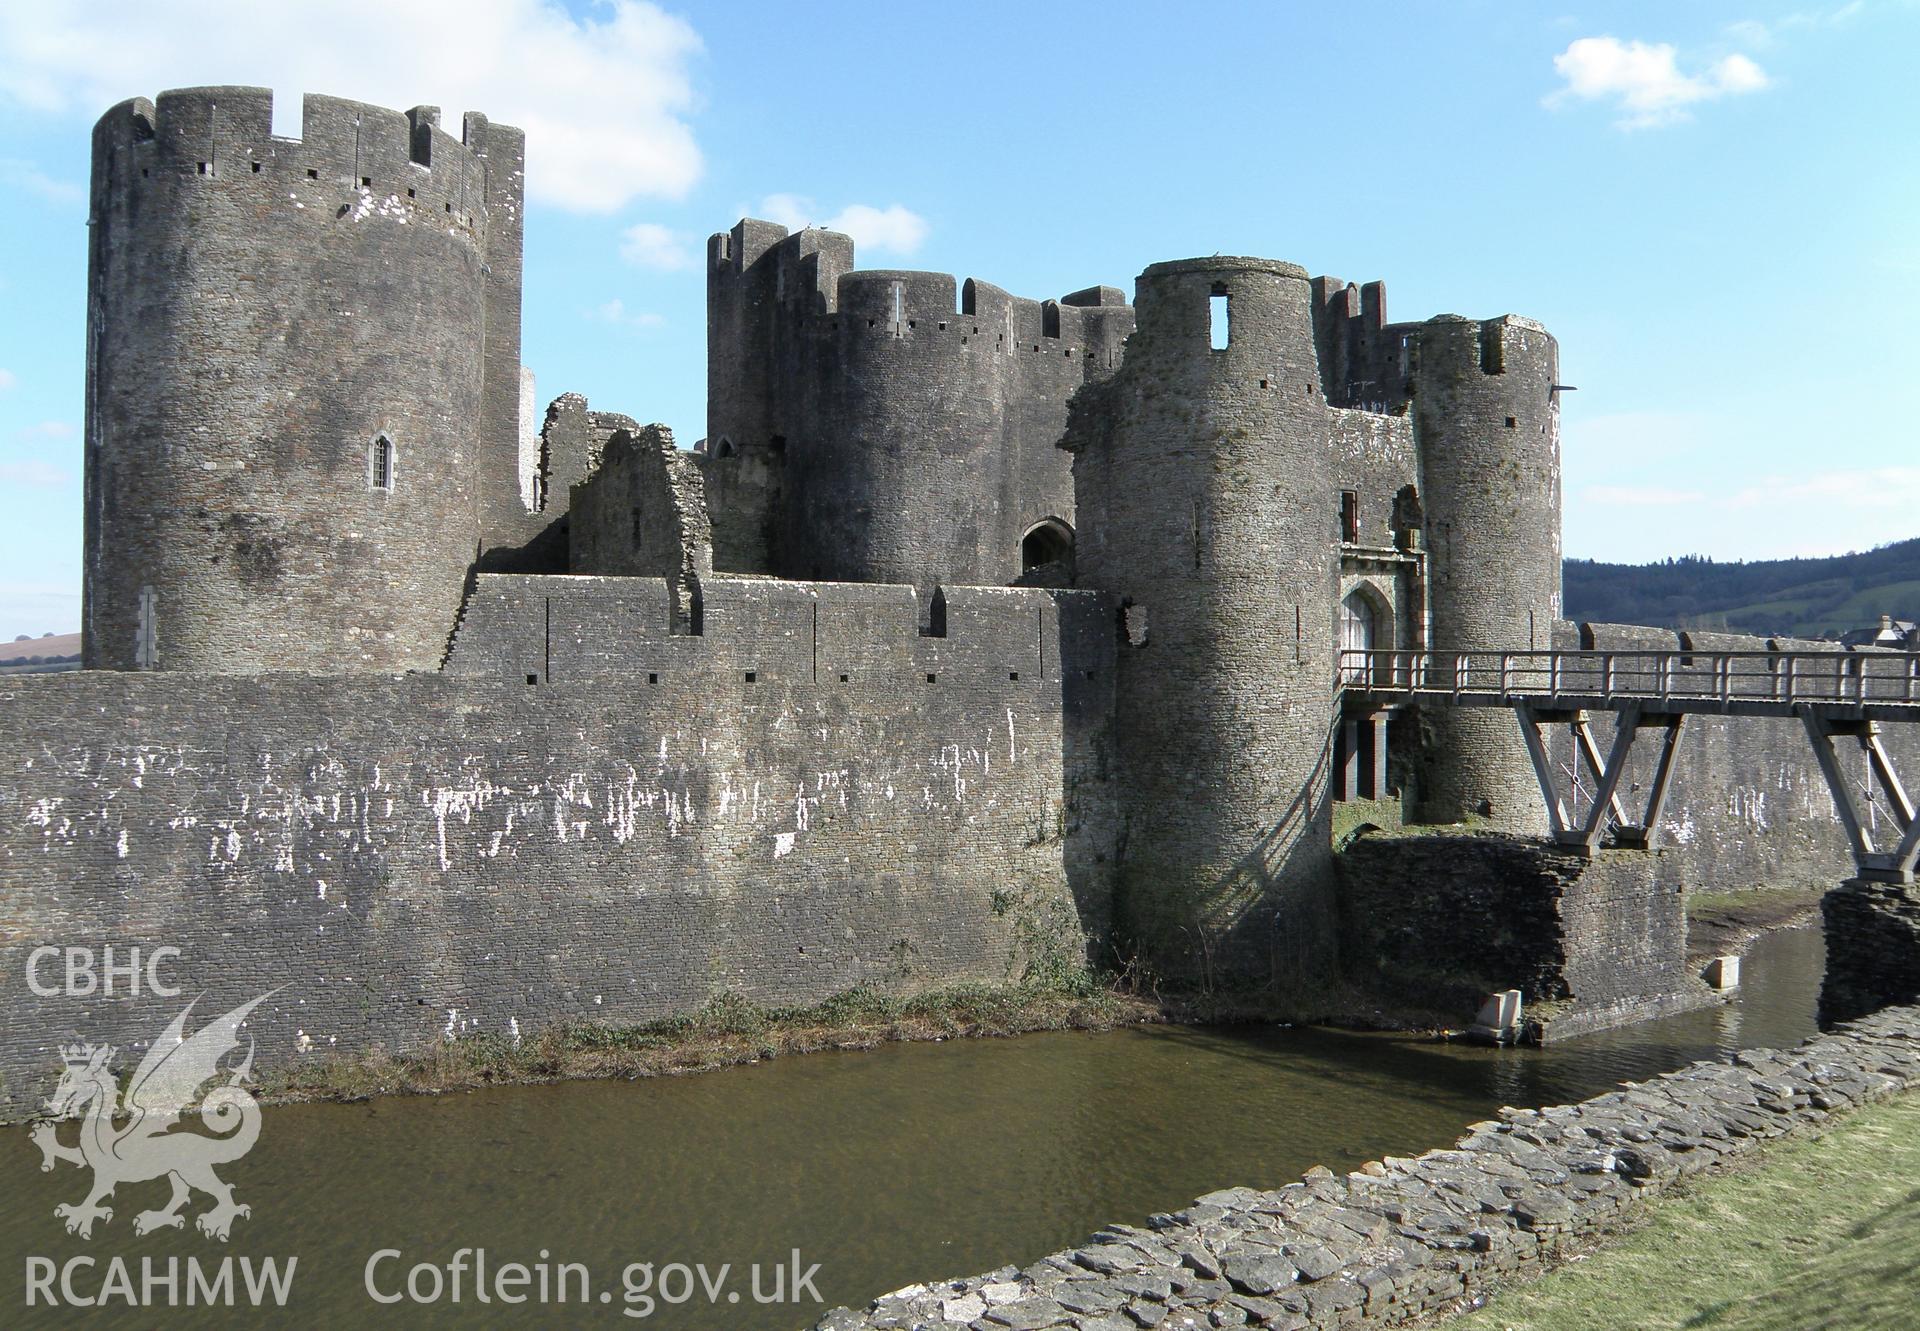 Colour photo showing Caerphilly Castle, produced by  Paul R. Davis,  31st March 2013.